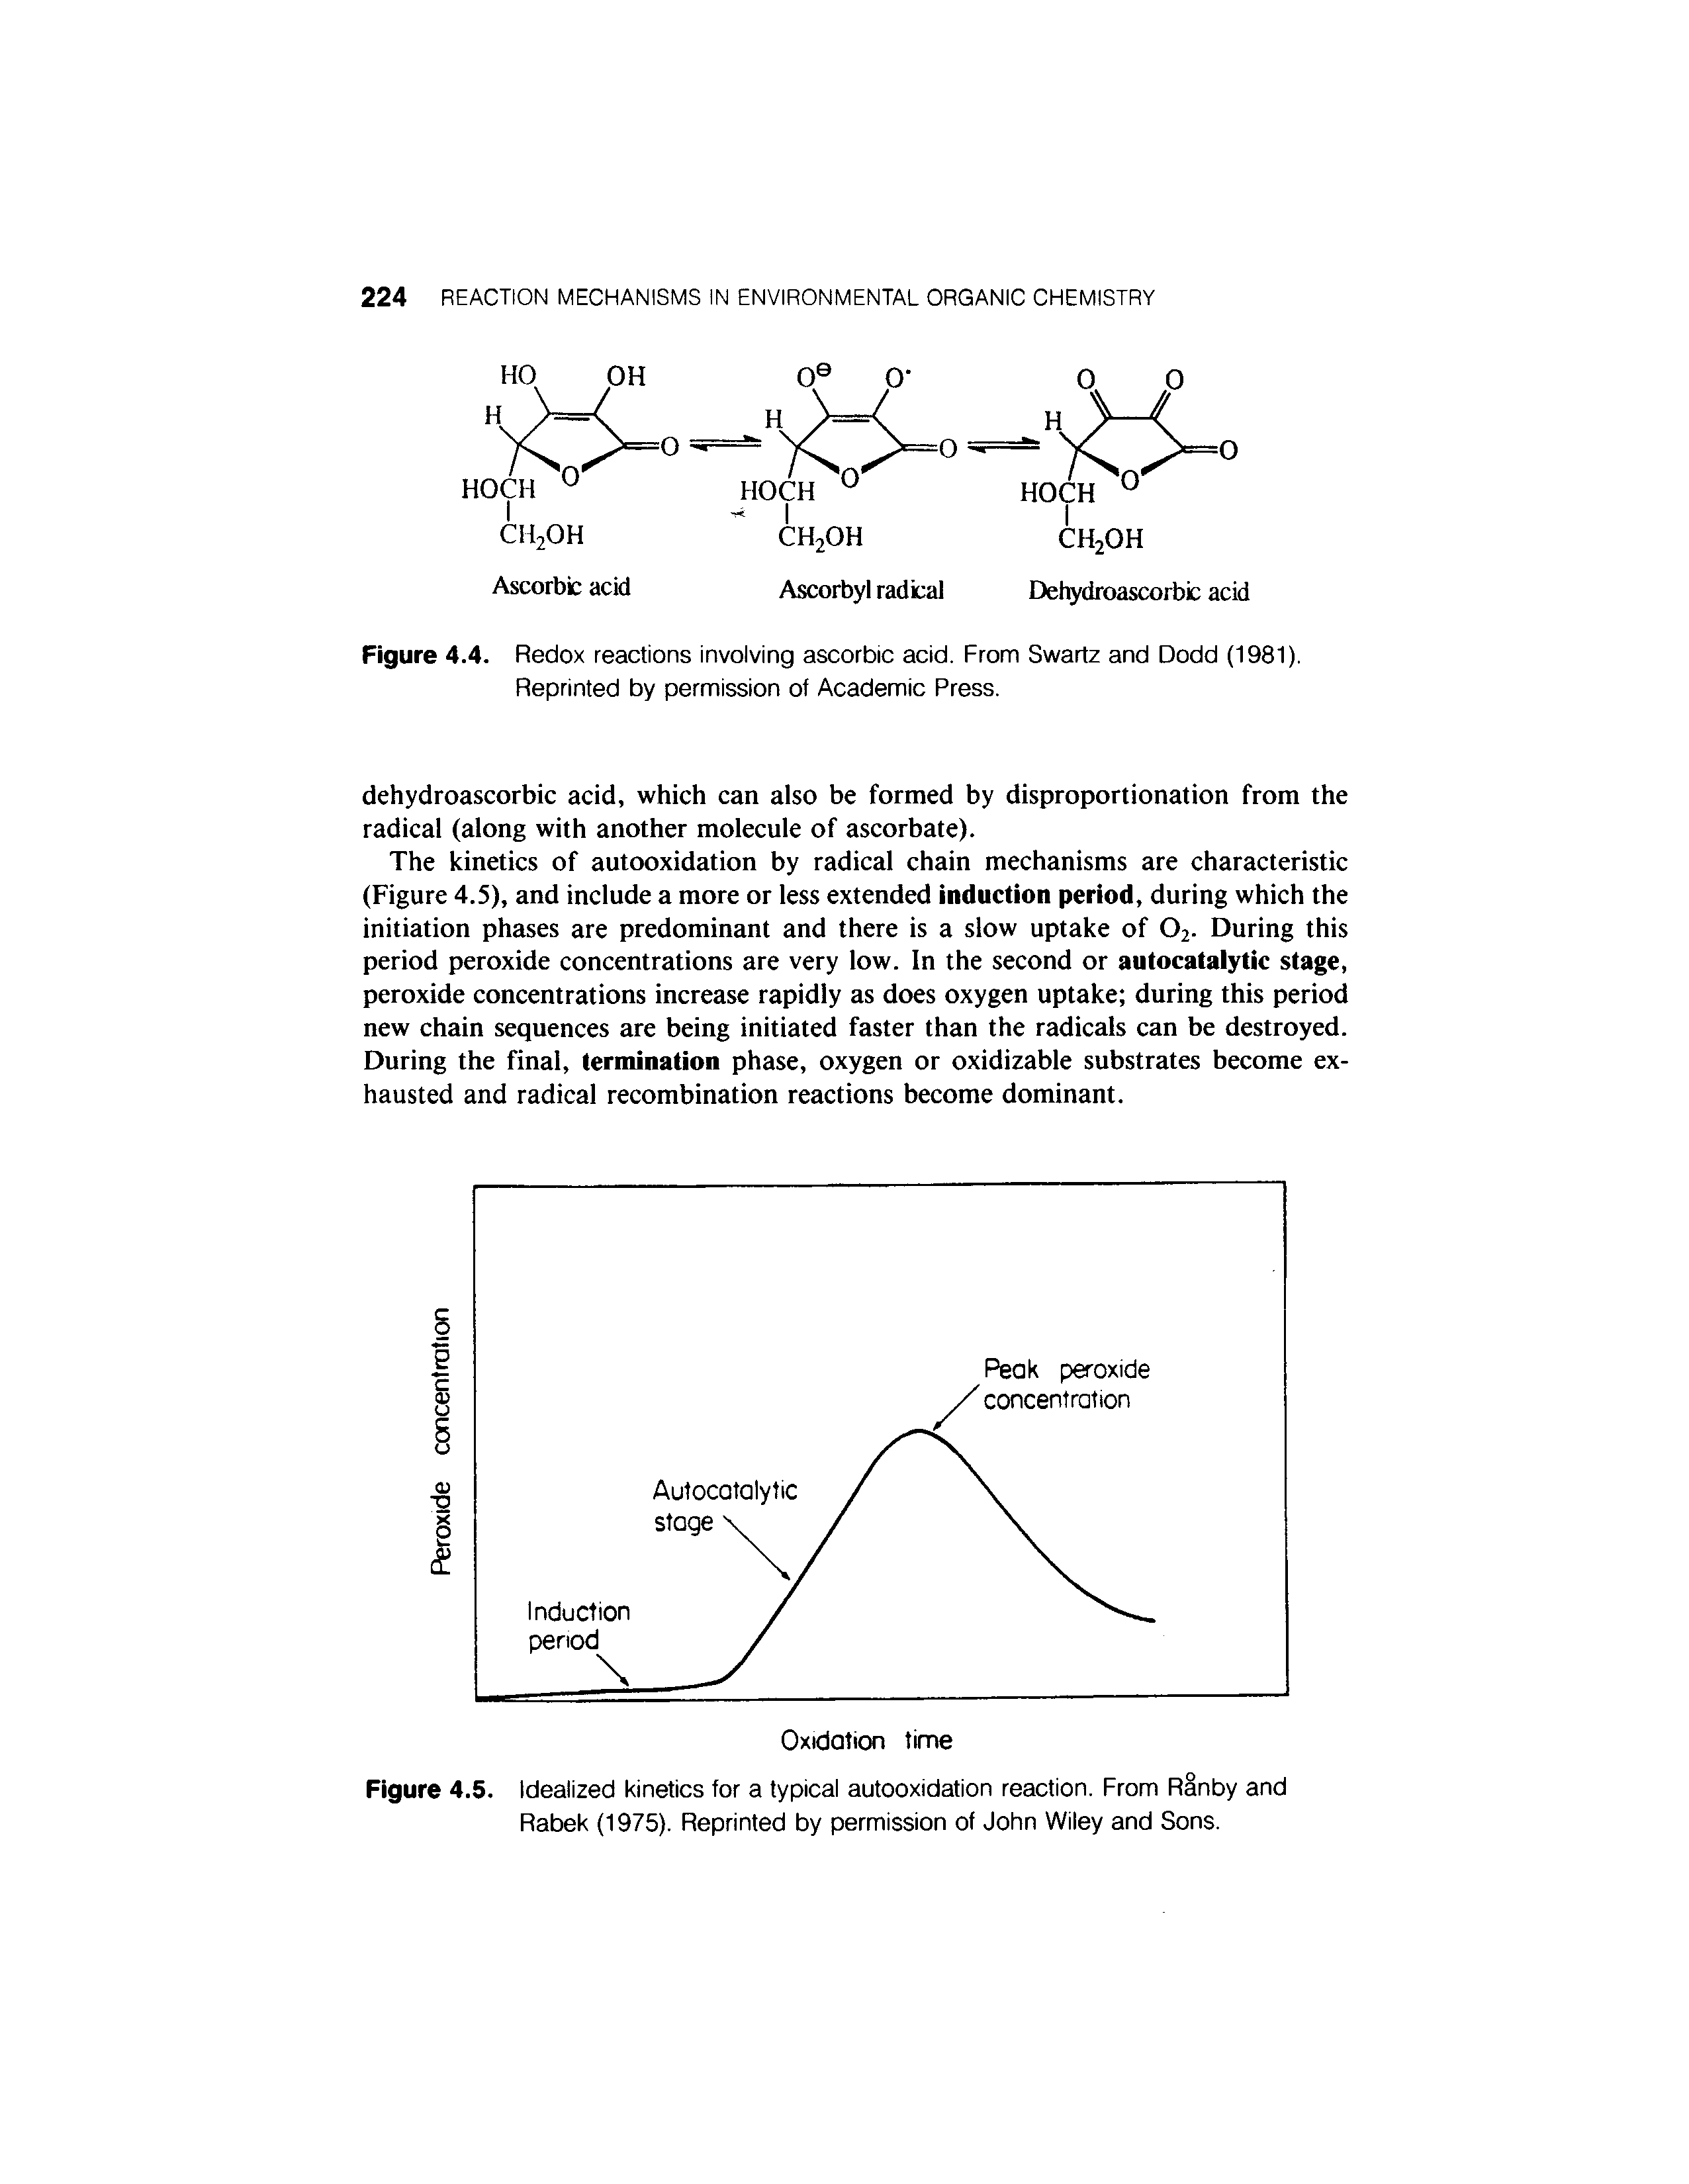 Figure 4.5. Idealized kinetics for a typical autooxidation reaction. From Ranby and Rabek (1975). Reprinted by permission of John Wiley and Sons.